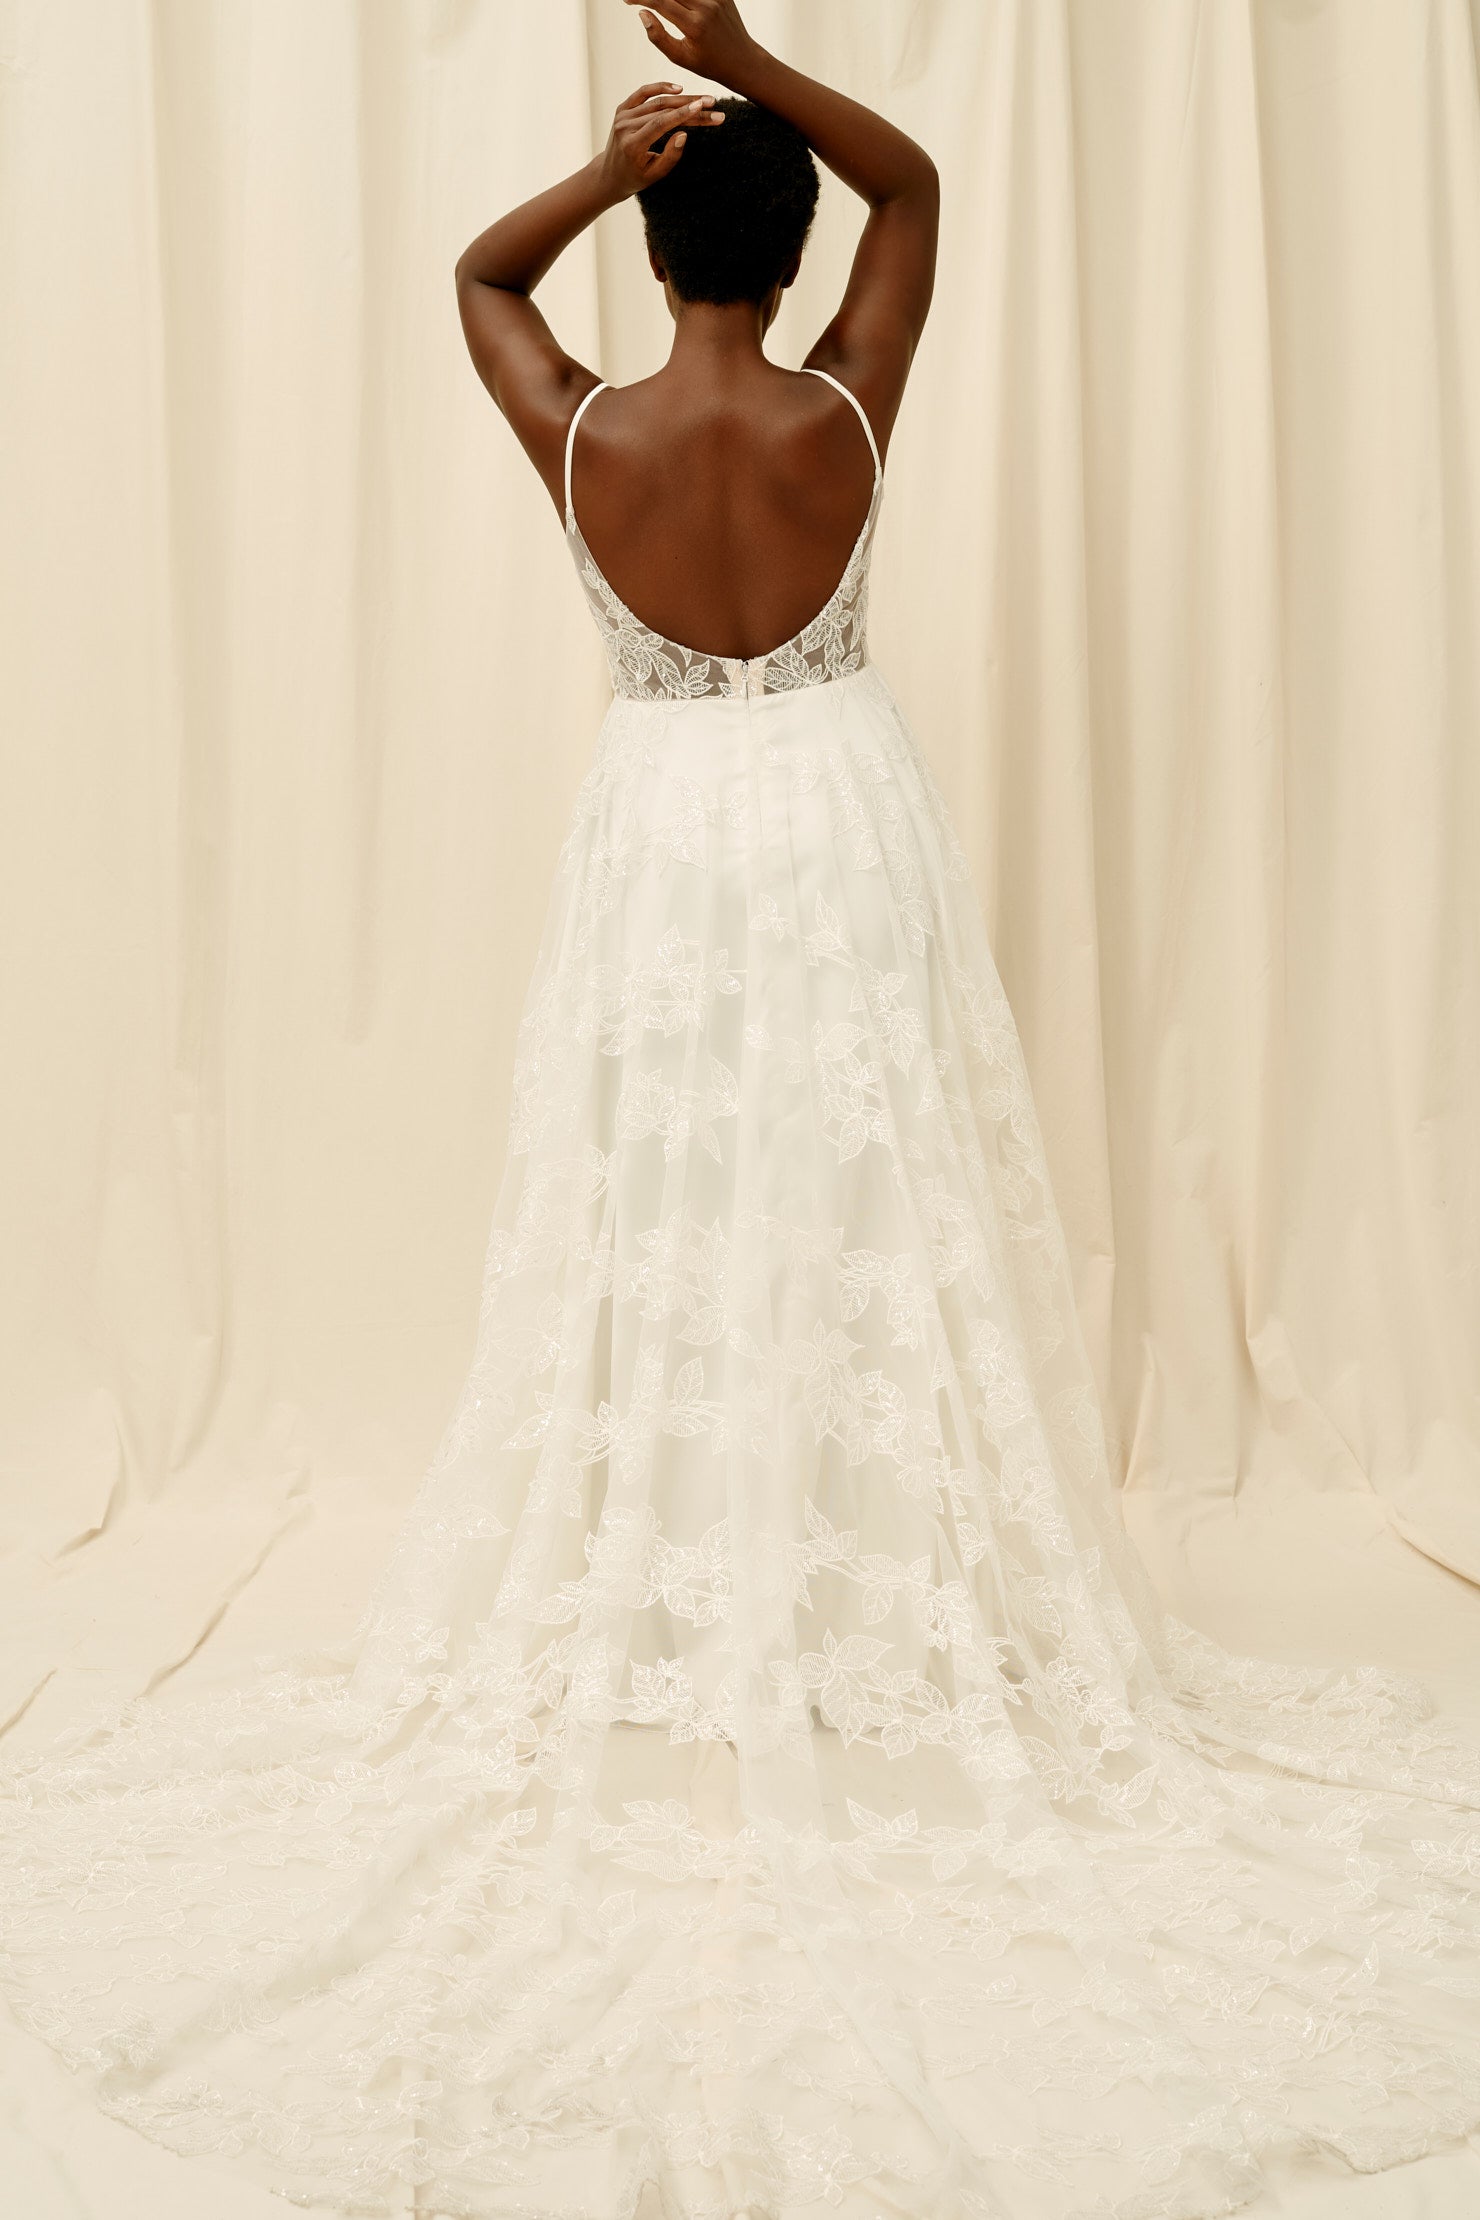 Backless wedding dress with botanical lace and spaghetti straps